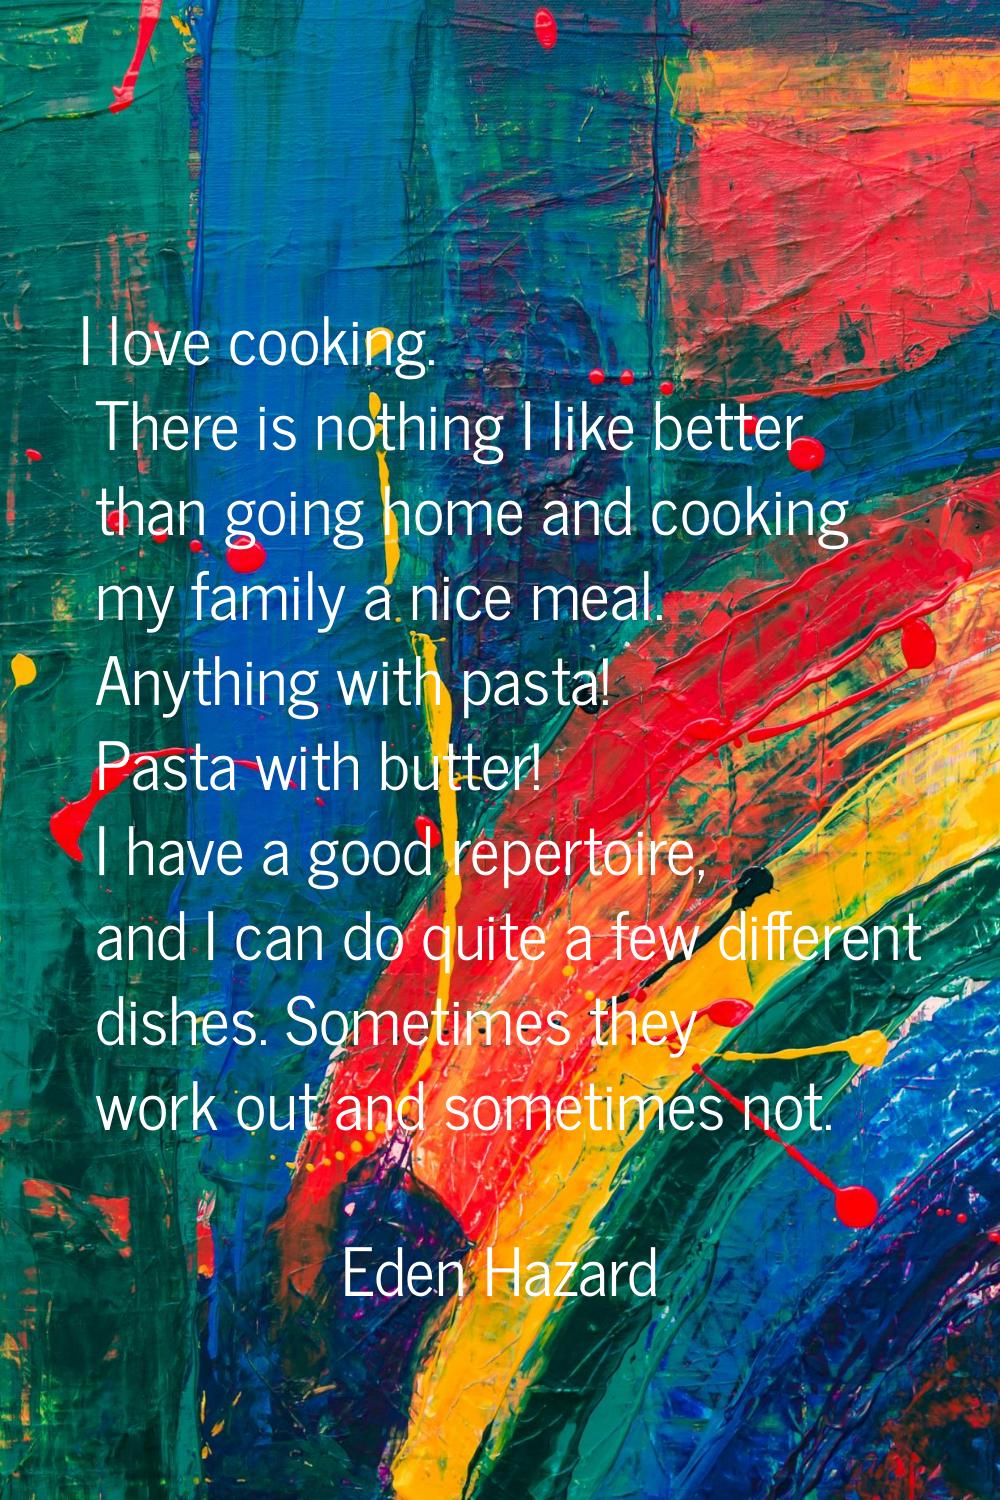 I love cooking. There is nothing I like better than going home and cooking my family a nice meal. A